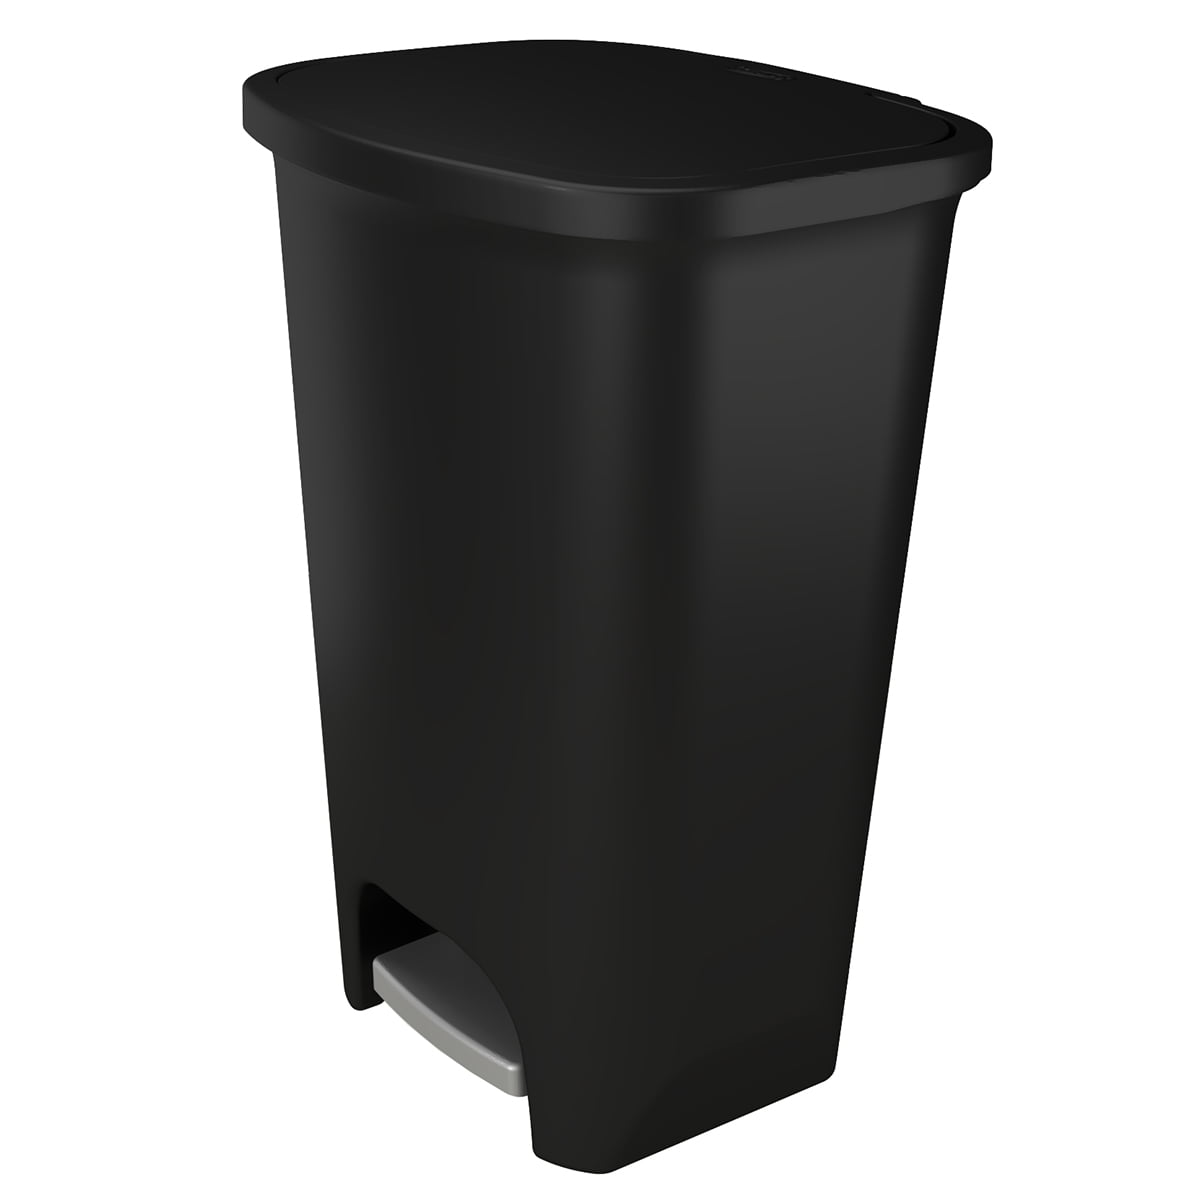 Glad Step Trash Can, 20 Gallon, GLD-74507 Soft Close Lid Stainless